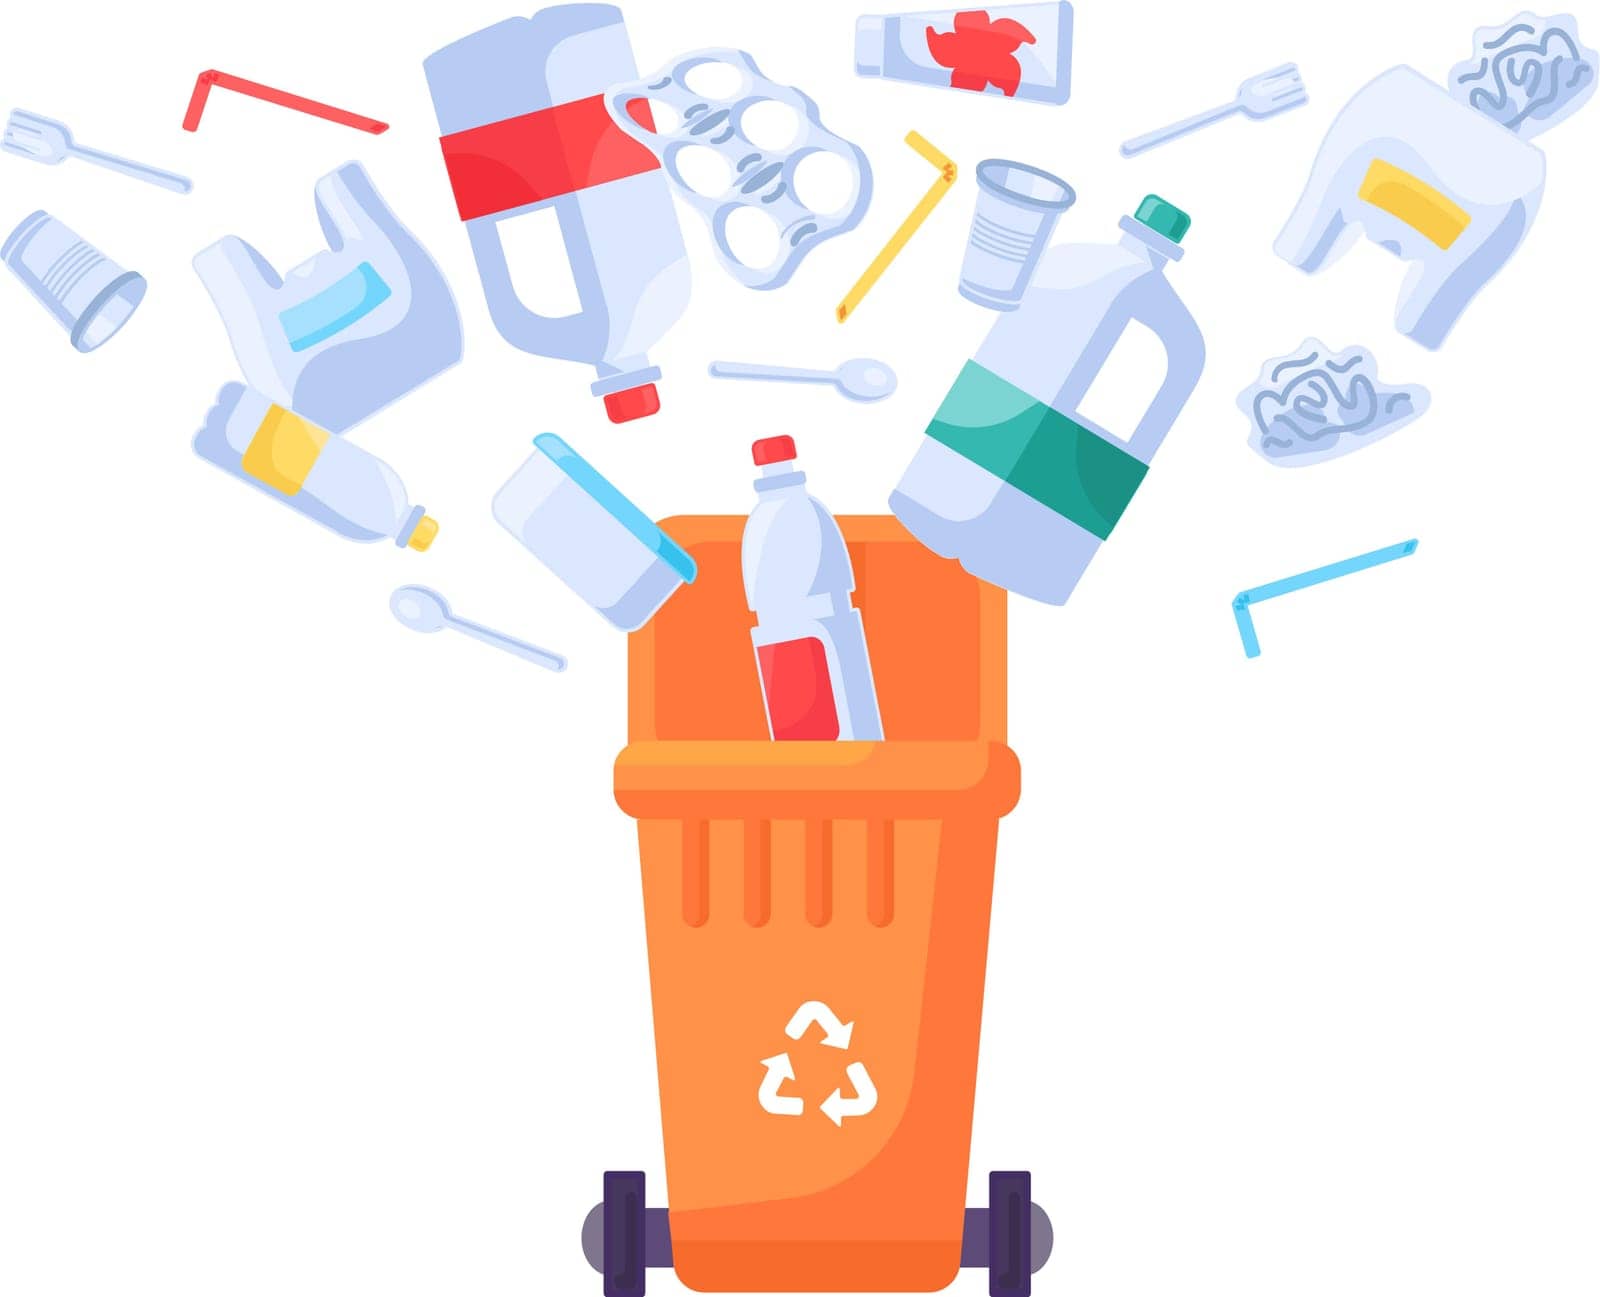 Old unwanted Plastic Items fall into open trash can. Heap of old bottles, packaging, disposable tableware. Plastic pollution problem. Cartoon isolated vector isolated on white background